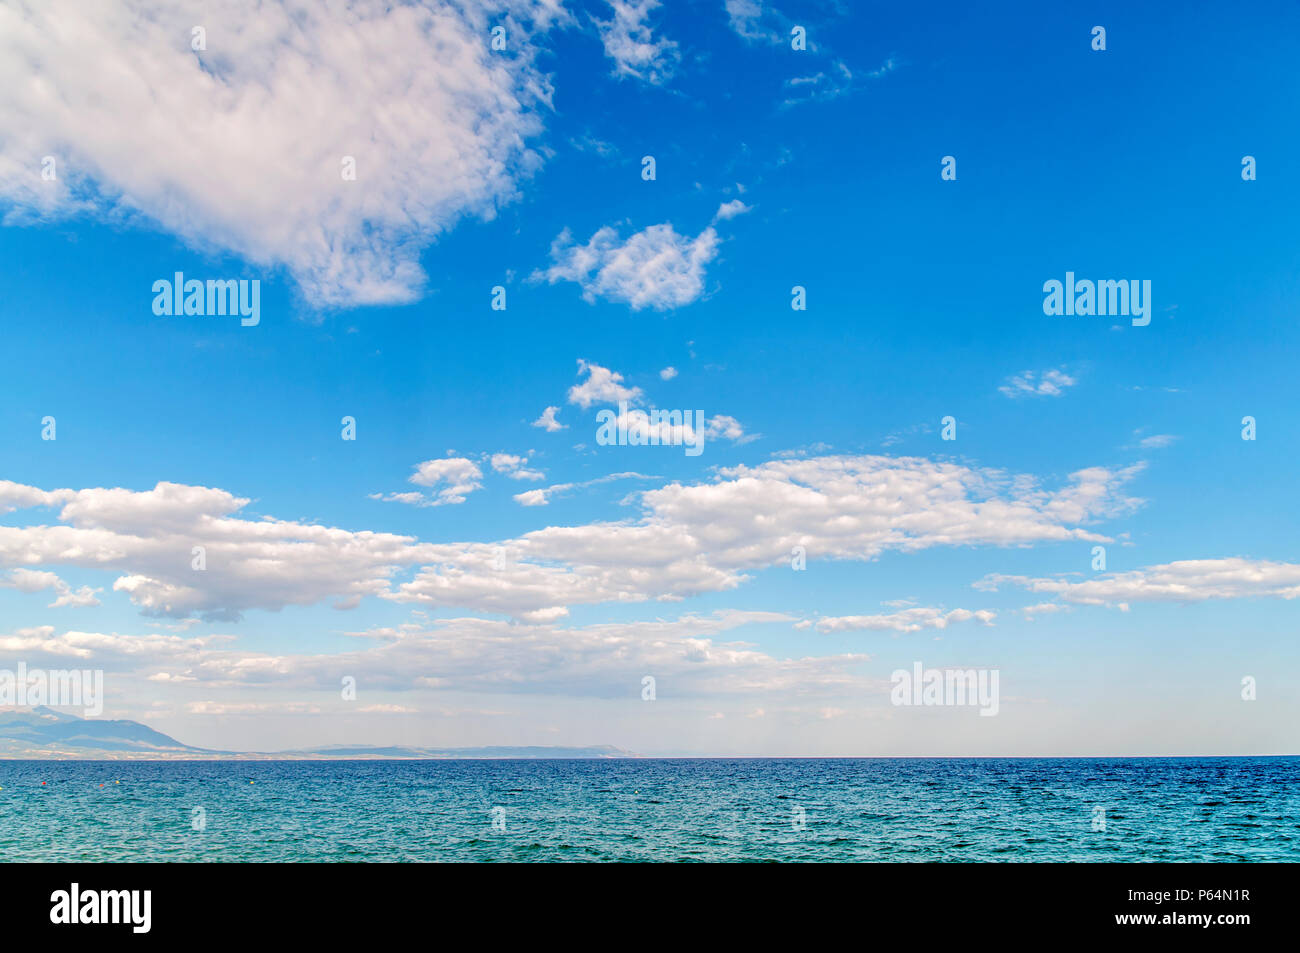 Perfect sky and water of ocean background Stock Photo